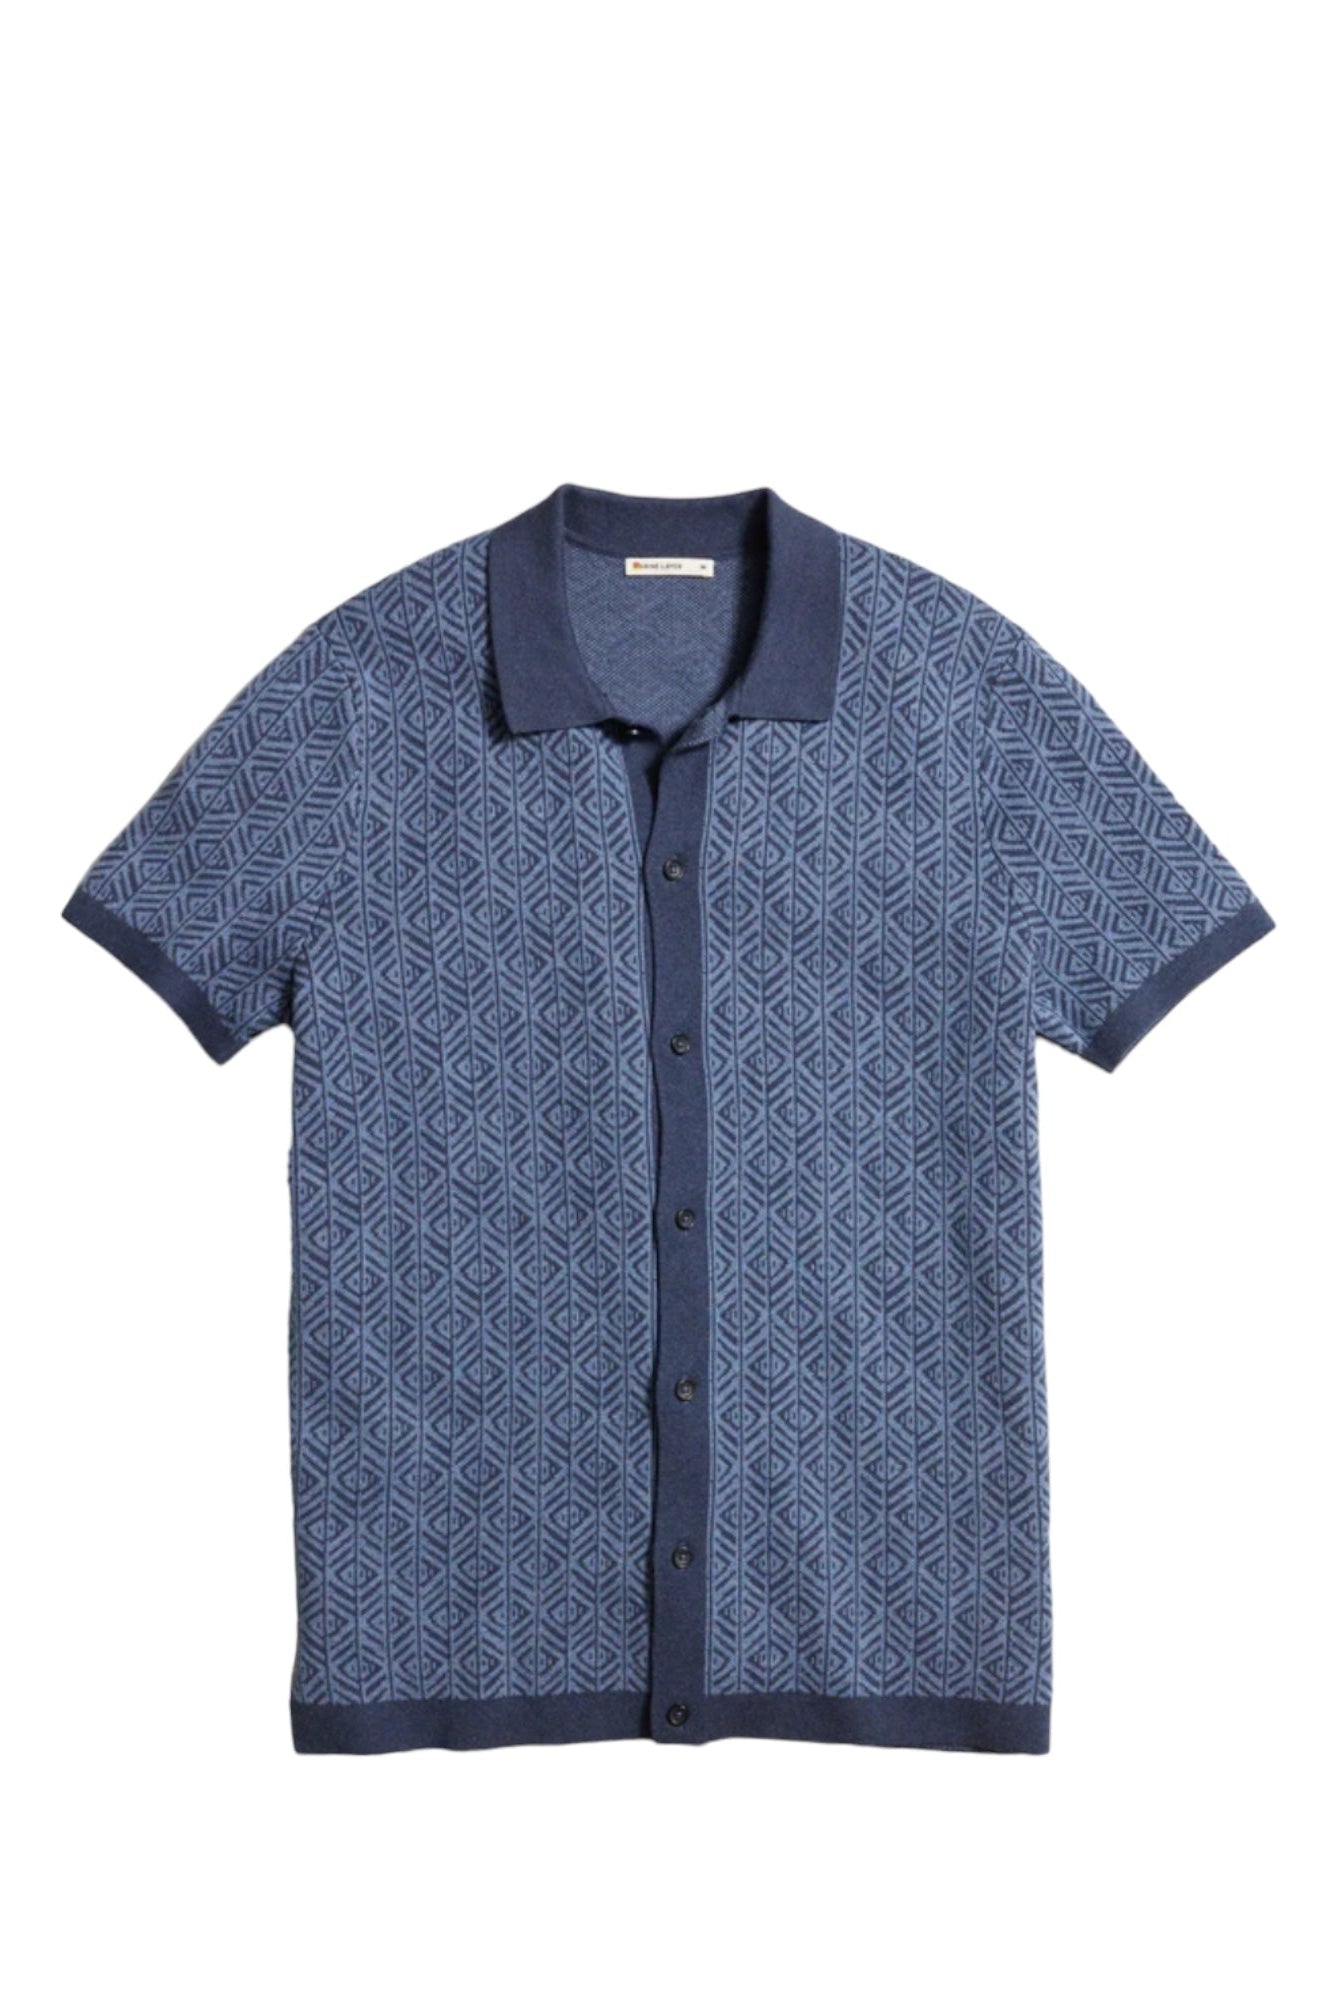 Ethan Sweater Button Down - Endless Waves